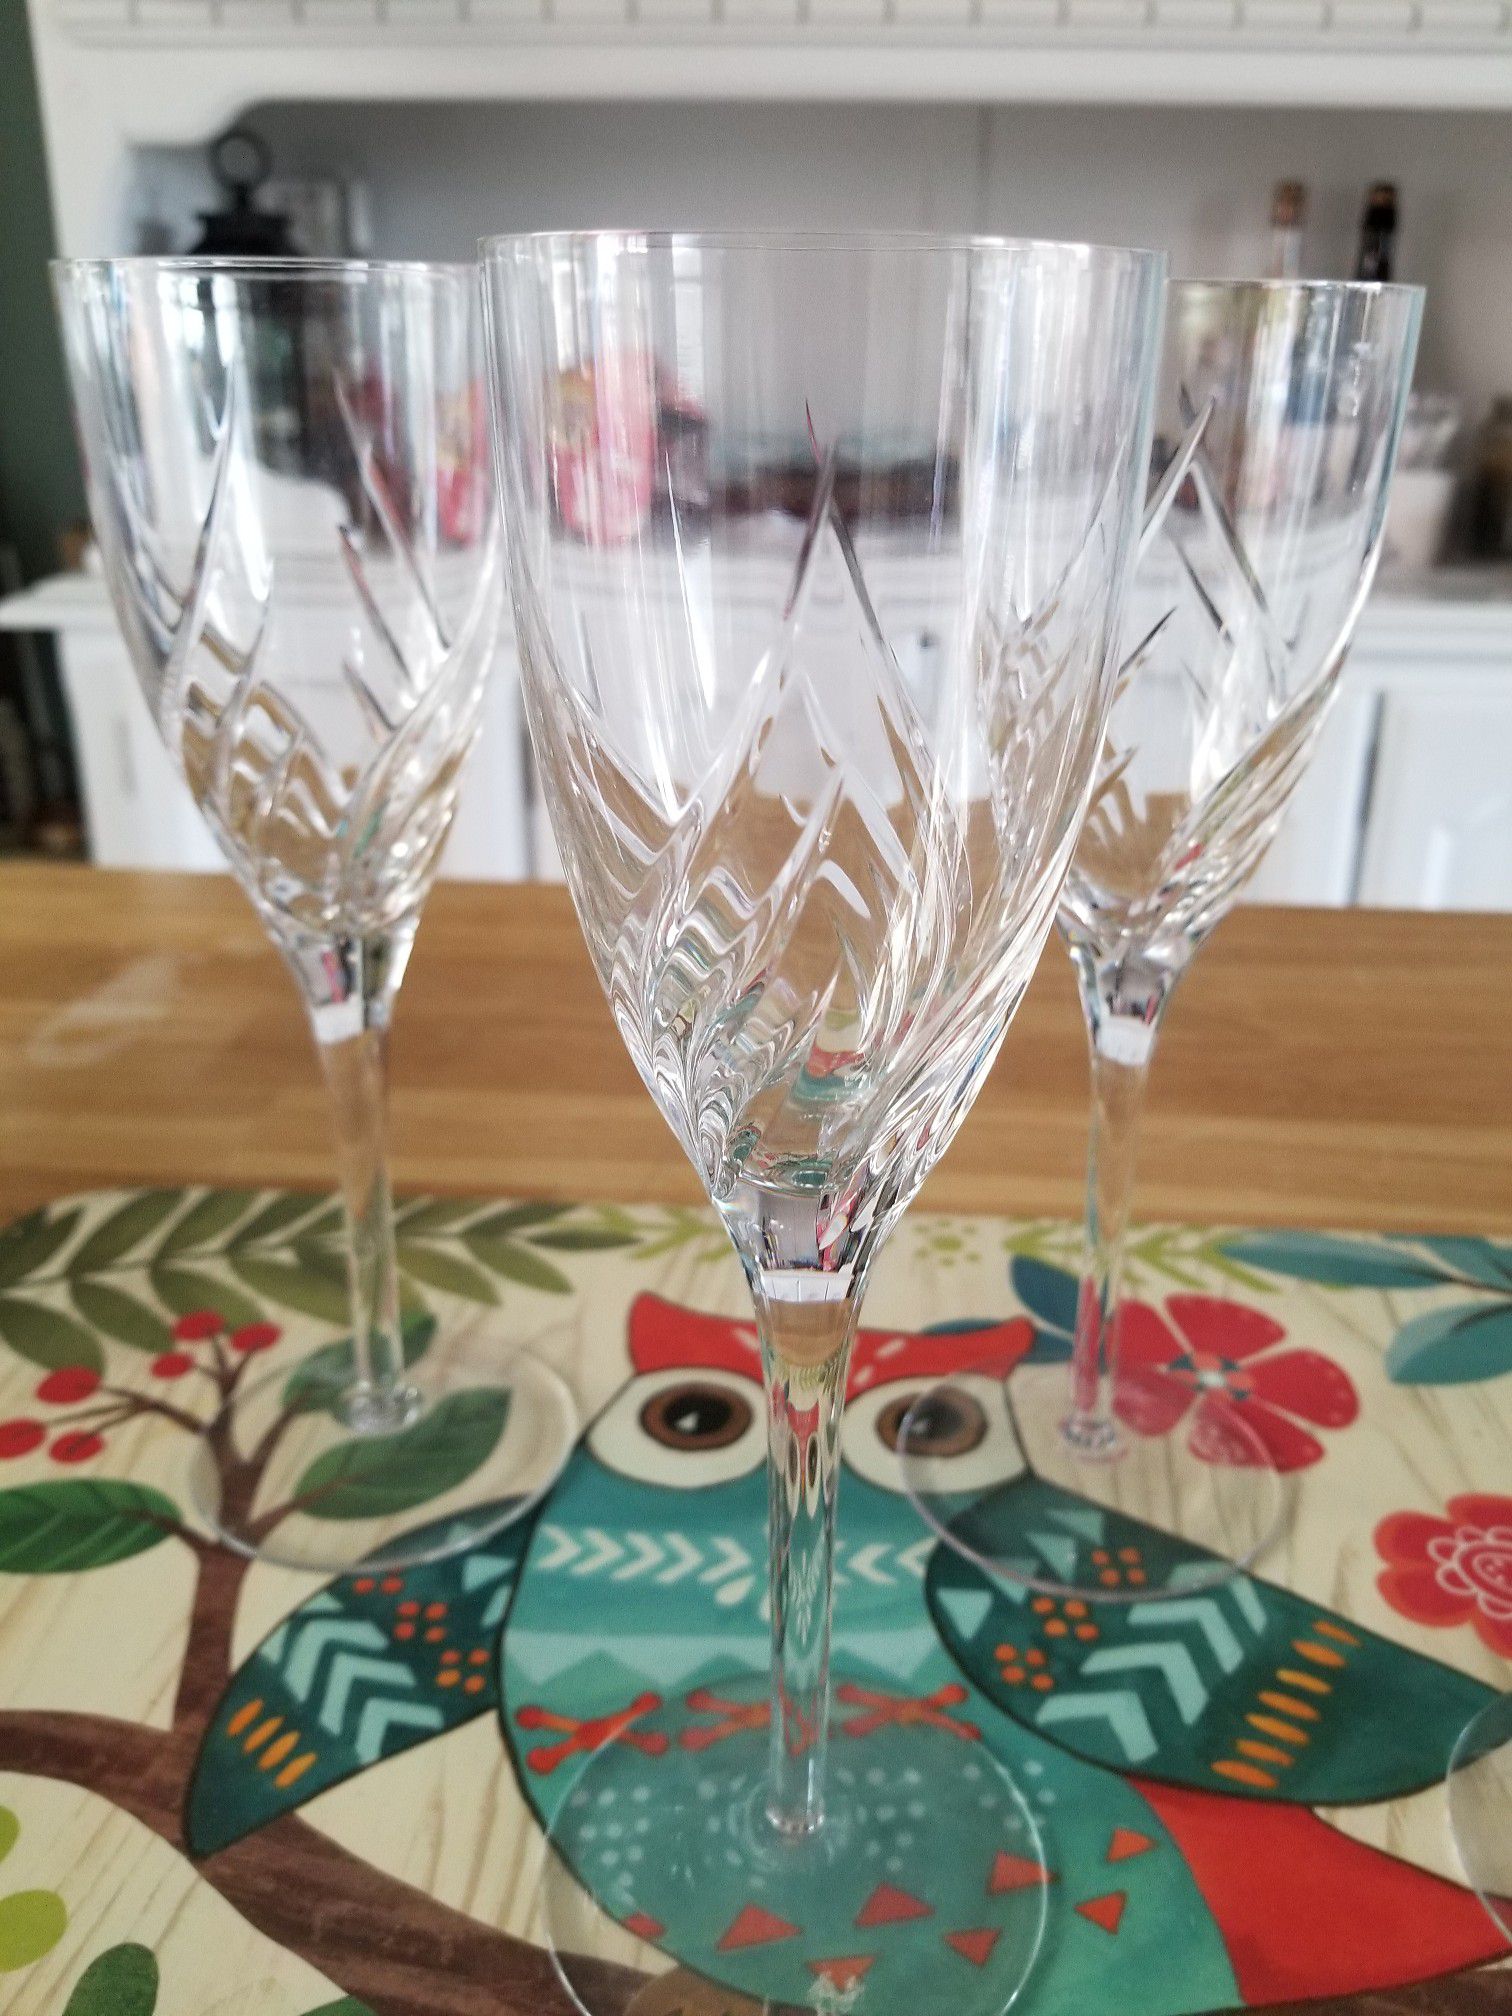 Discontinued Noritake Moondust Champagne flutes